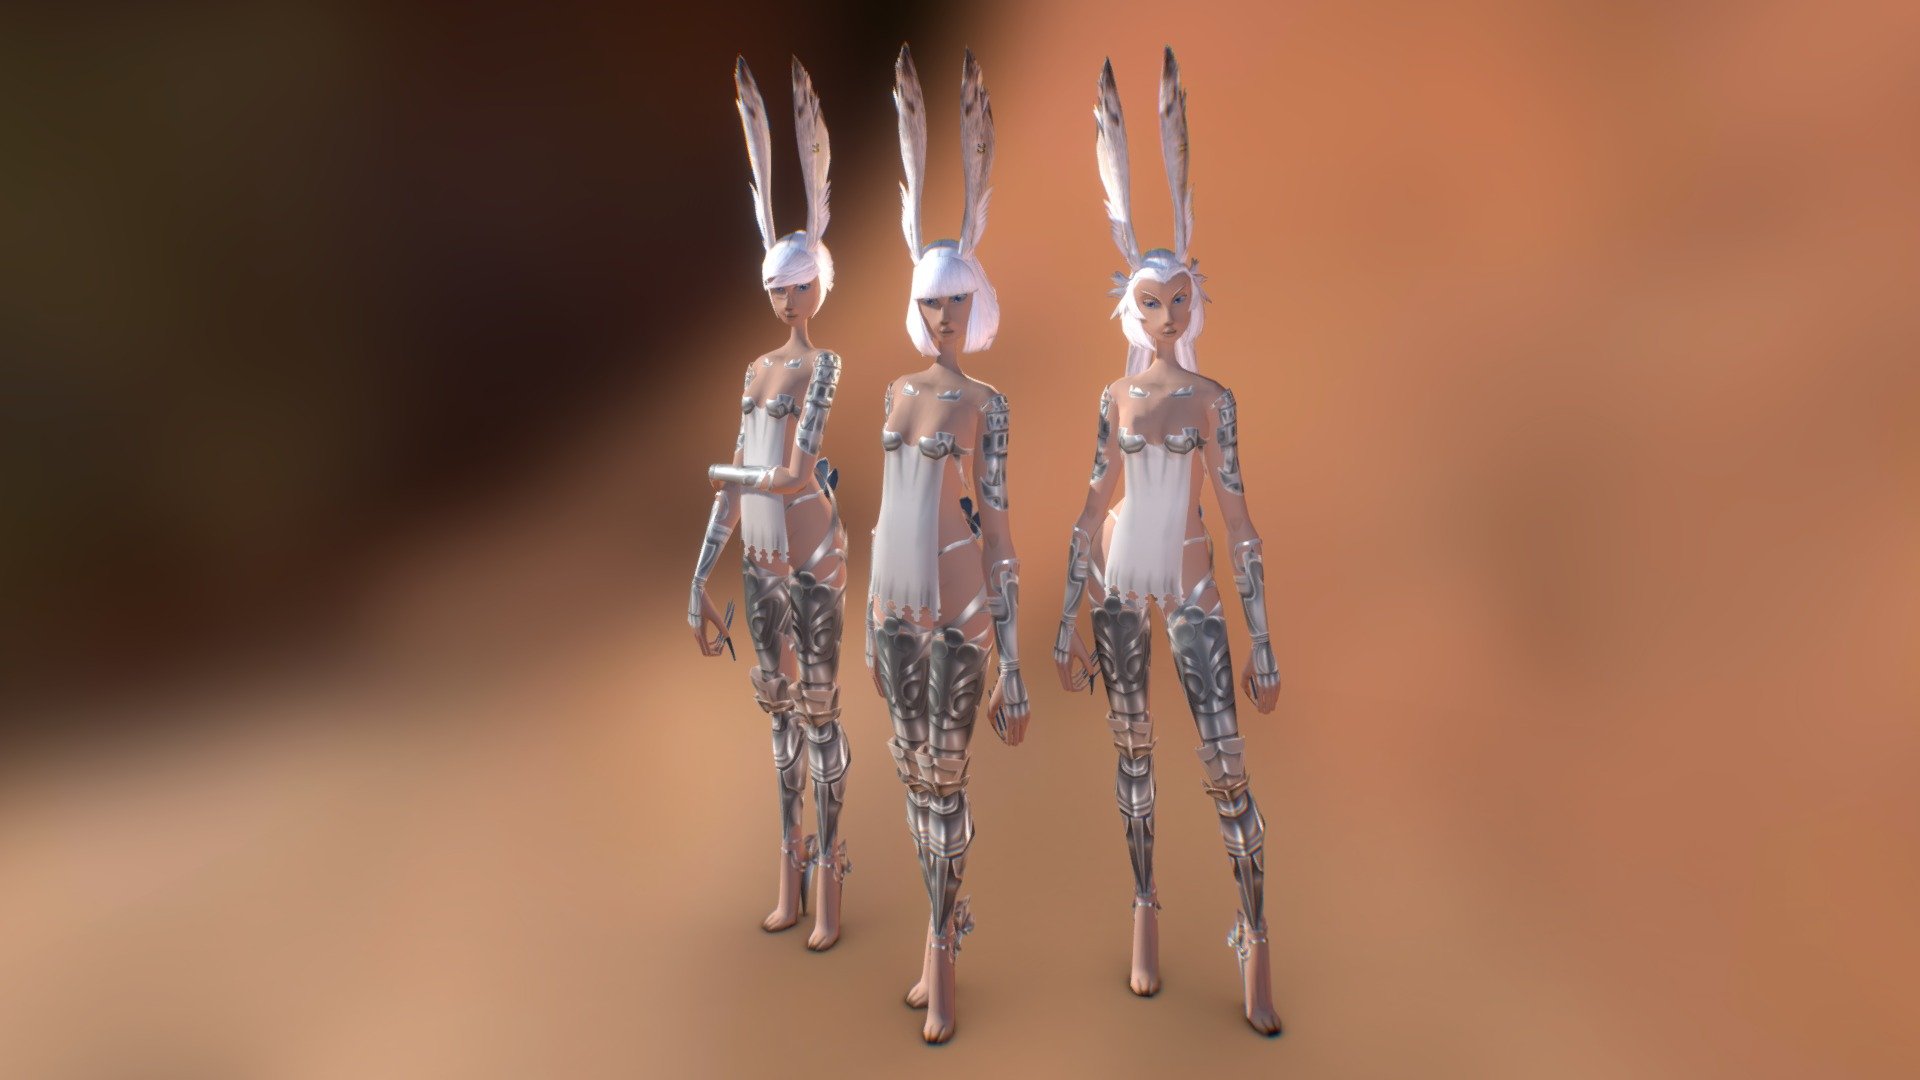 Vieras are a humanoid race from the Final Fantasy XII world.

Here I modeled a highpoly version of the vieras known as Wood Dwellers, from Eruyt Village, home of the Viera.

Thanks! - Female Dwellers - Eruyt Village - Bunny Warriors - Download Free 3D model by Caìque Quintino (@CaiqueQuintino) 3d model